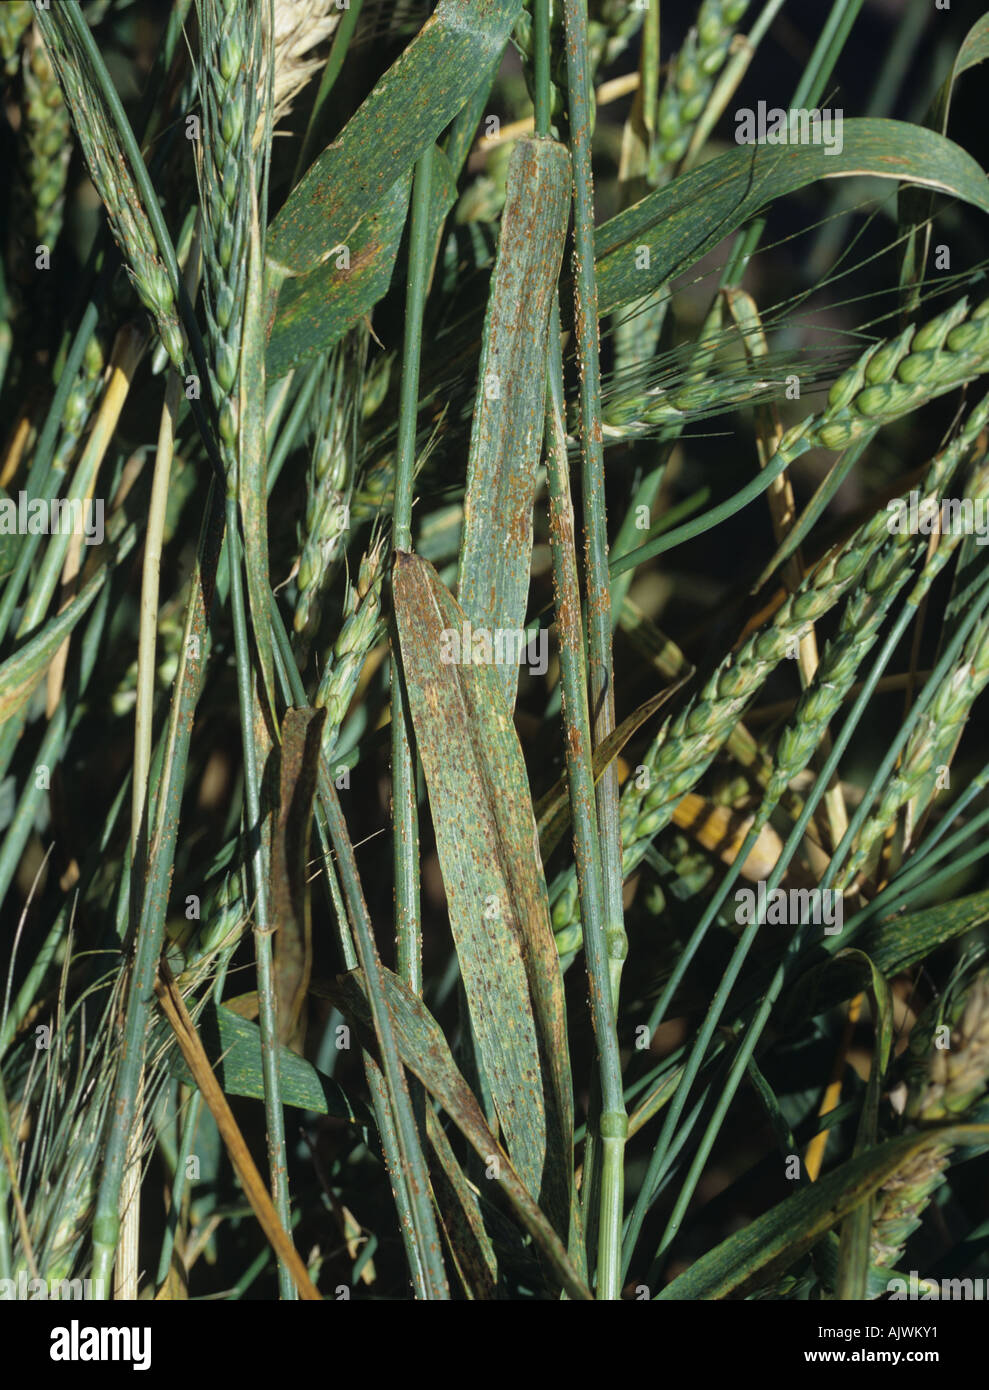 Severe infection black stem rust Puccinia graminis on bearded awned wheat Stock Photo